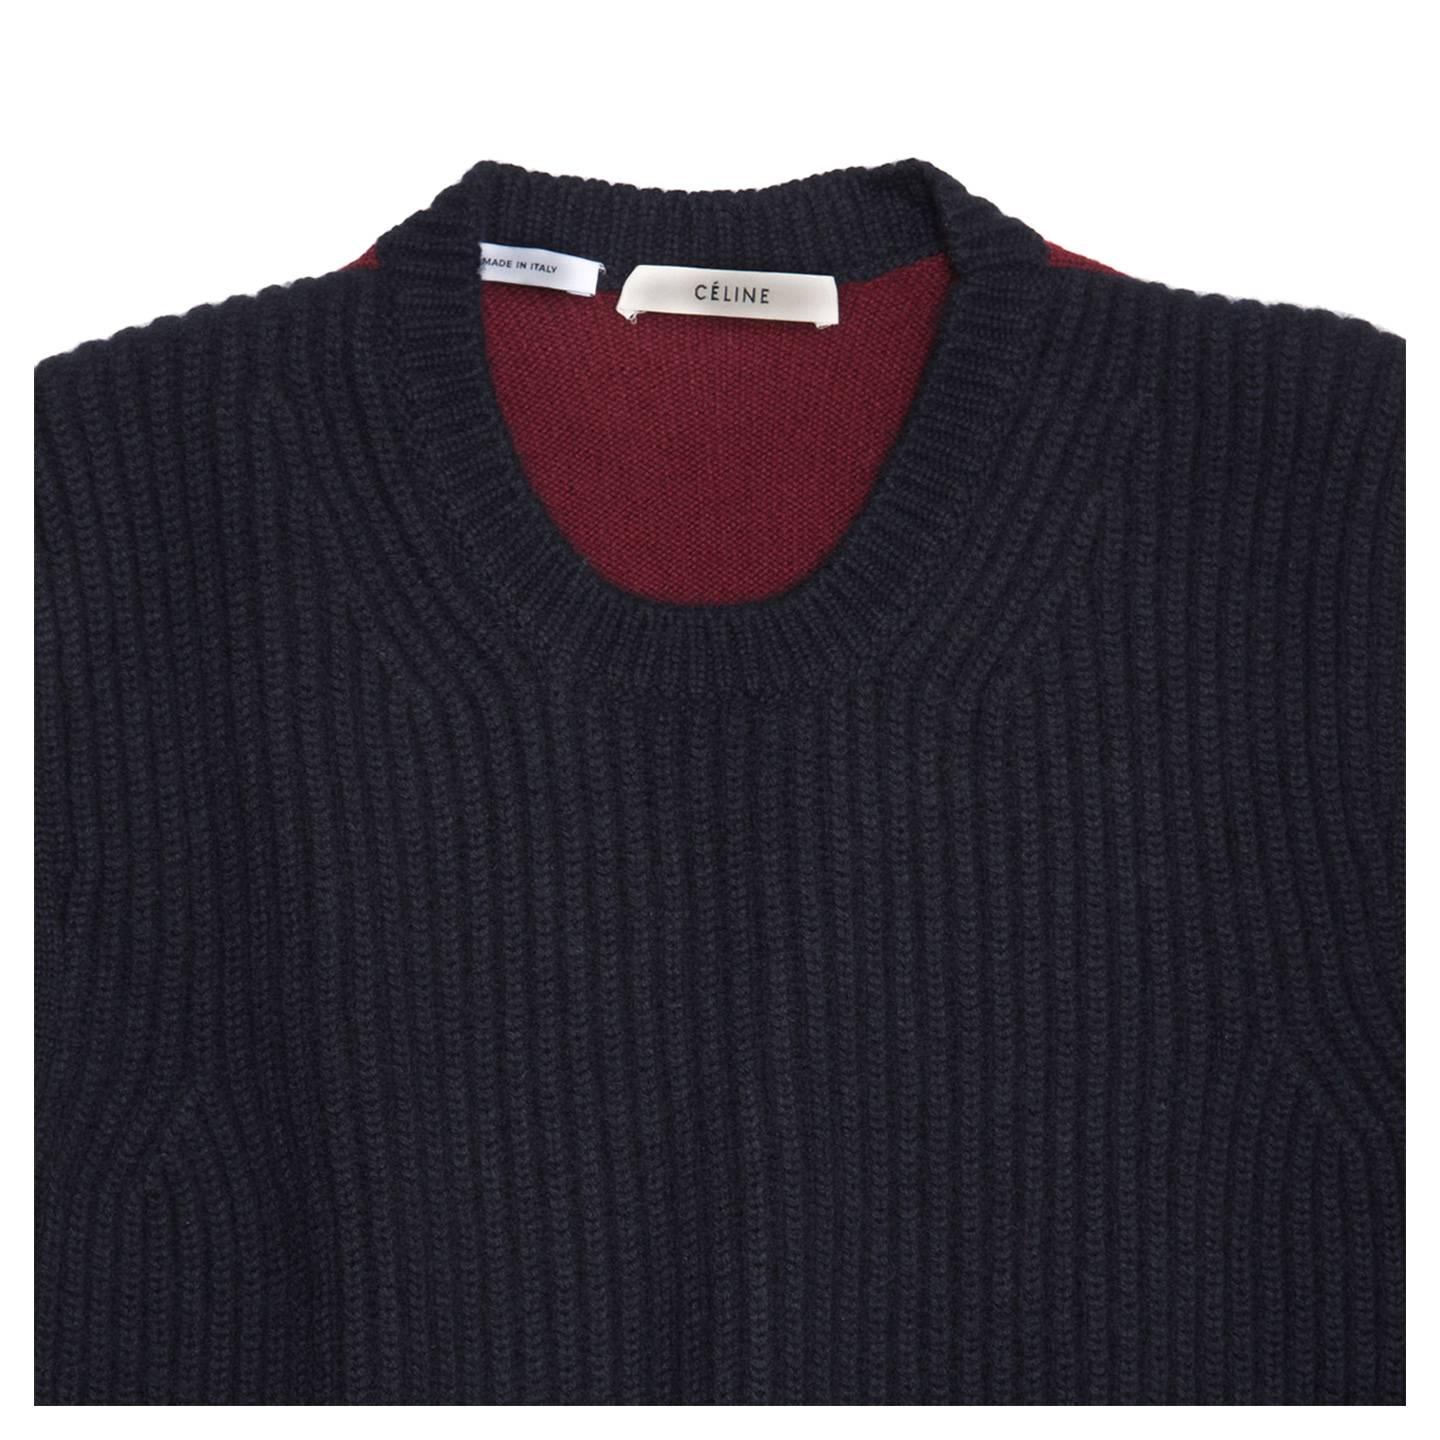 Celine Navy & Burgundy Sweater In Excellent Condition For Sale In Brooklyn, NY